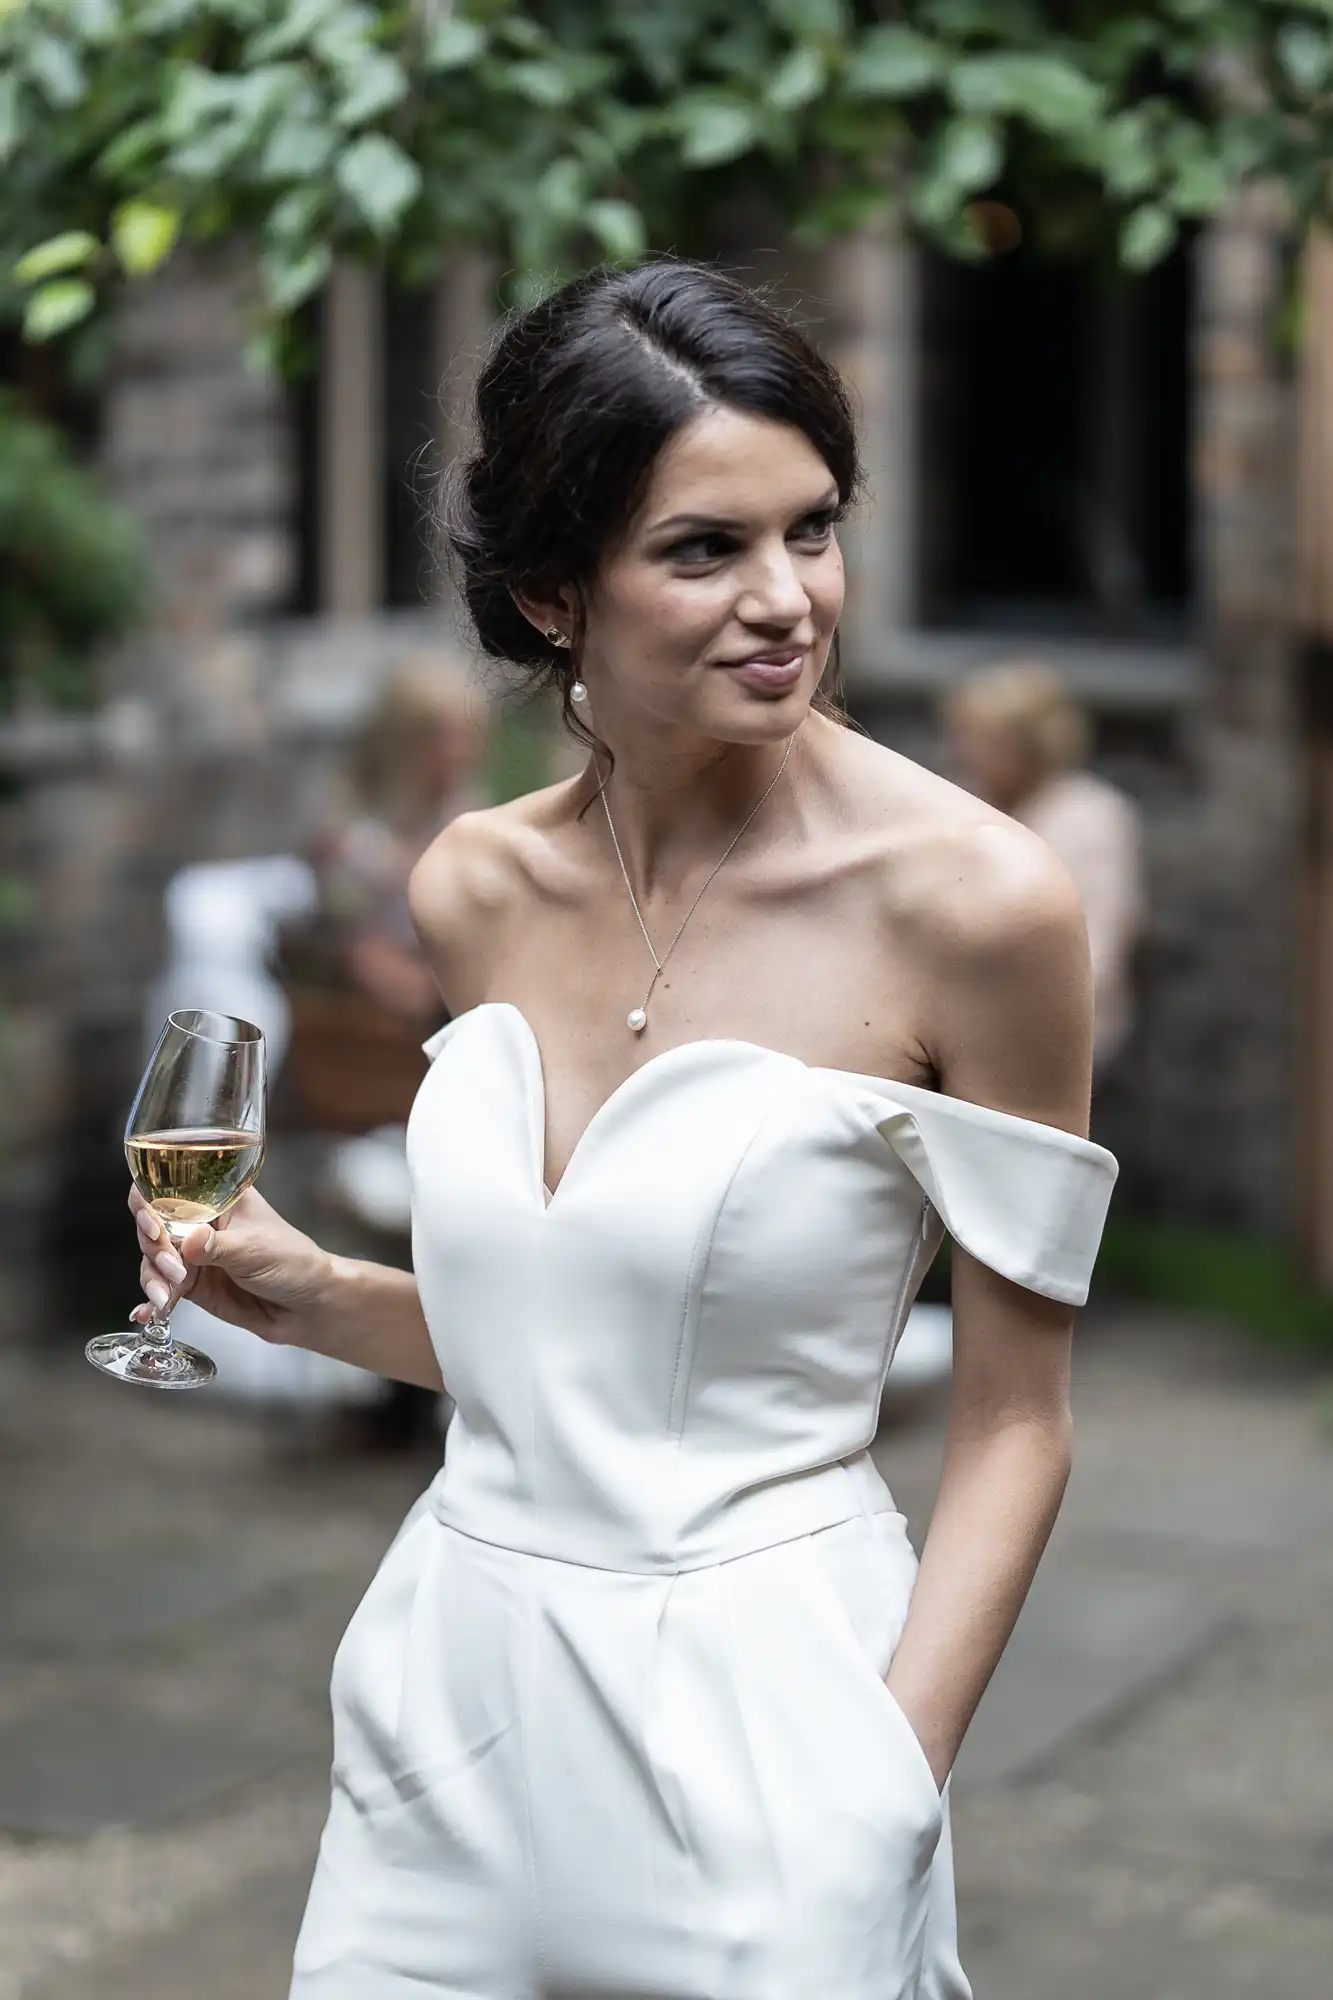 A woman in an elegant white off-the-shoulder dress holding a glass of wine at an outdoor event.